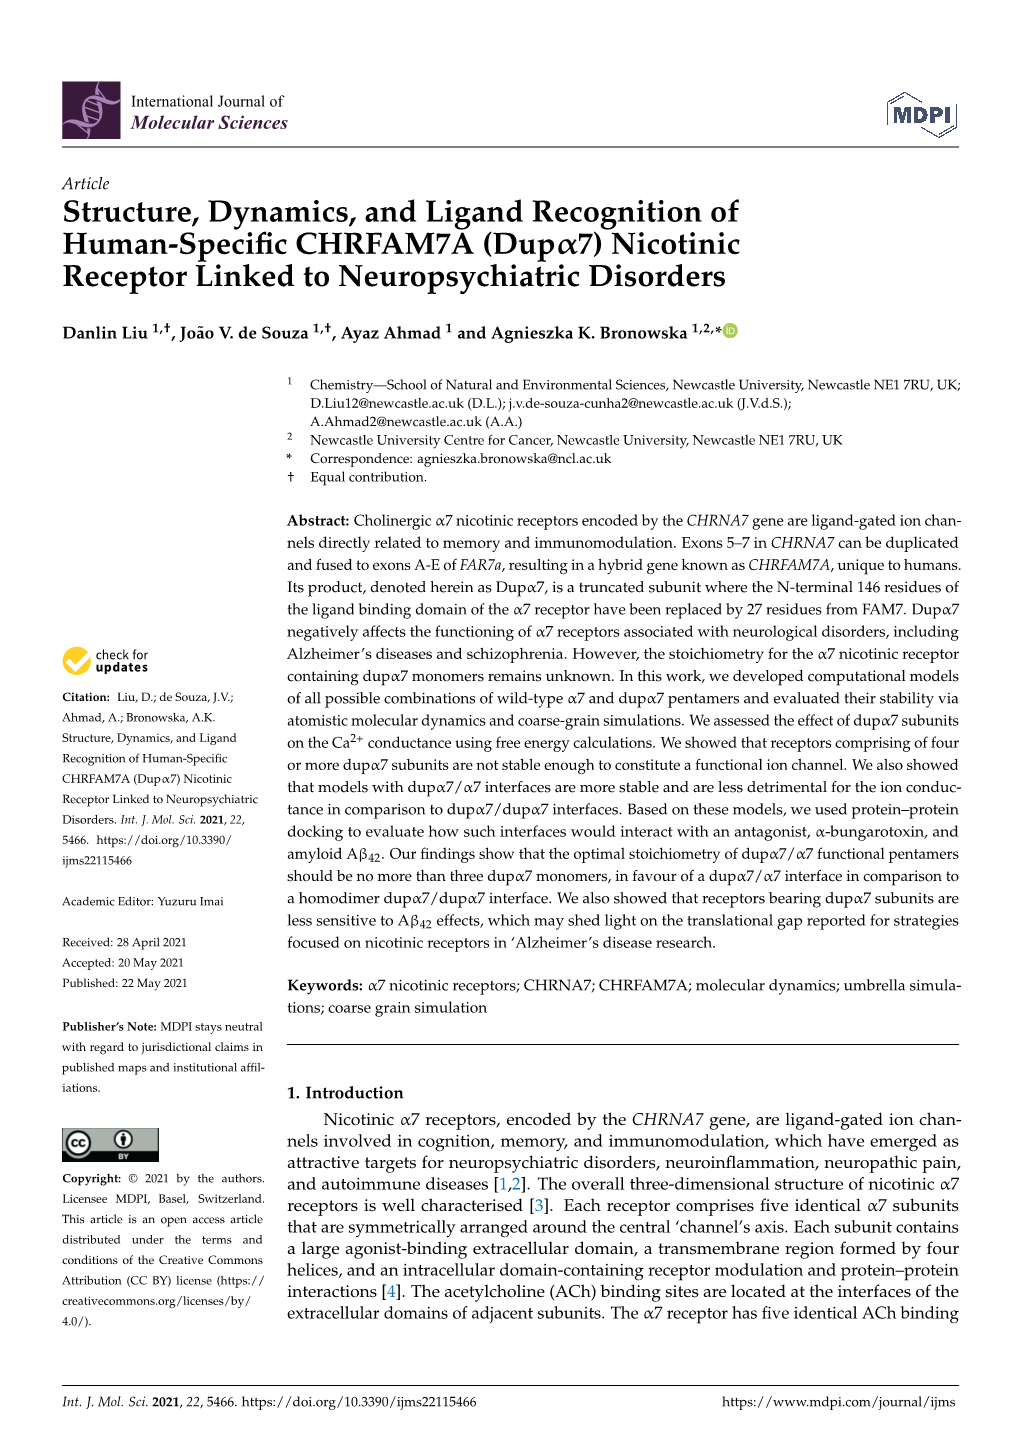 Structure, Dynamics, and Ligand Recognition of Human-Specific CHRFAM7A (Dup7) Nicotinic Receptor Linked to Neuropsychiatric Diso